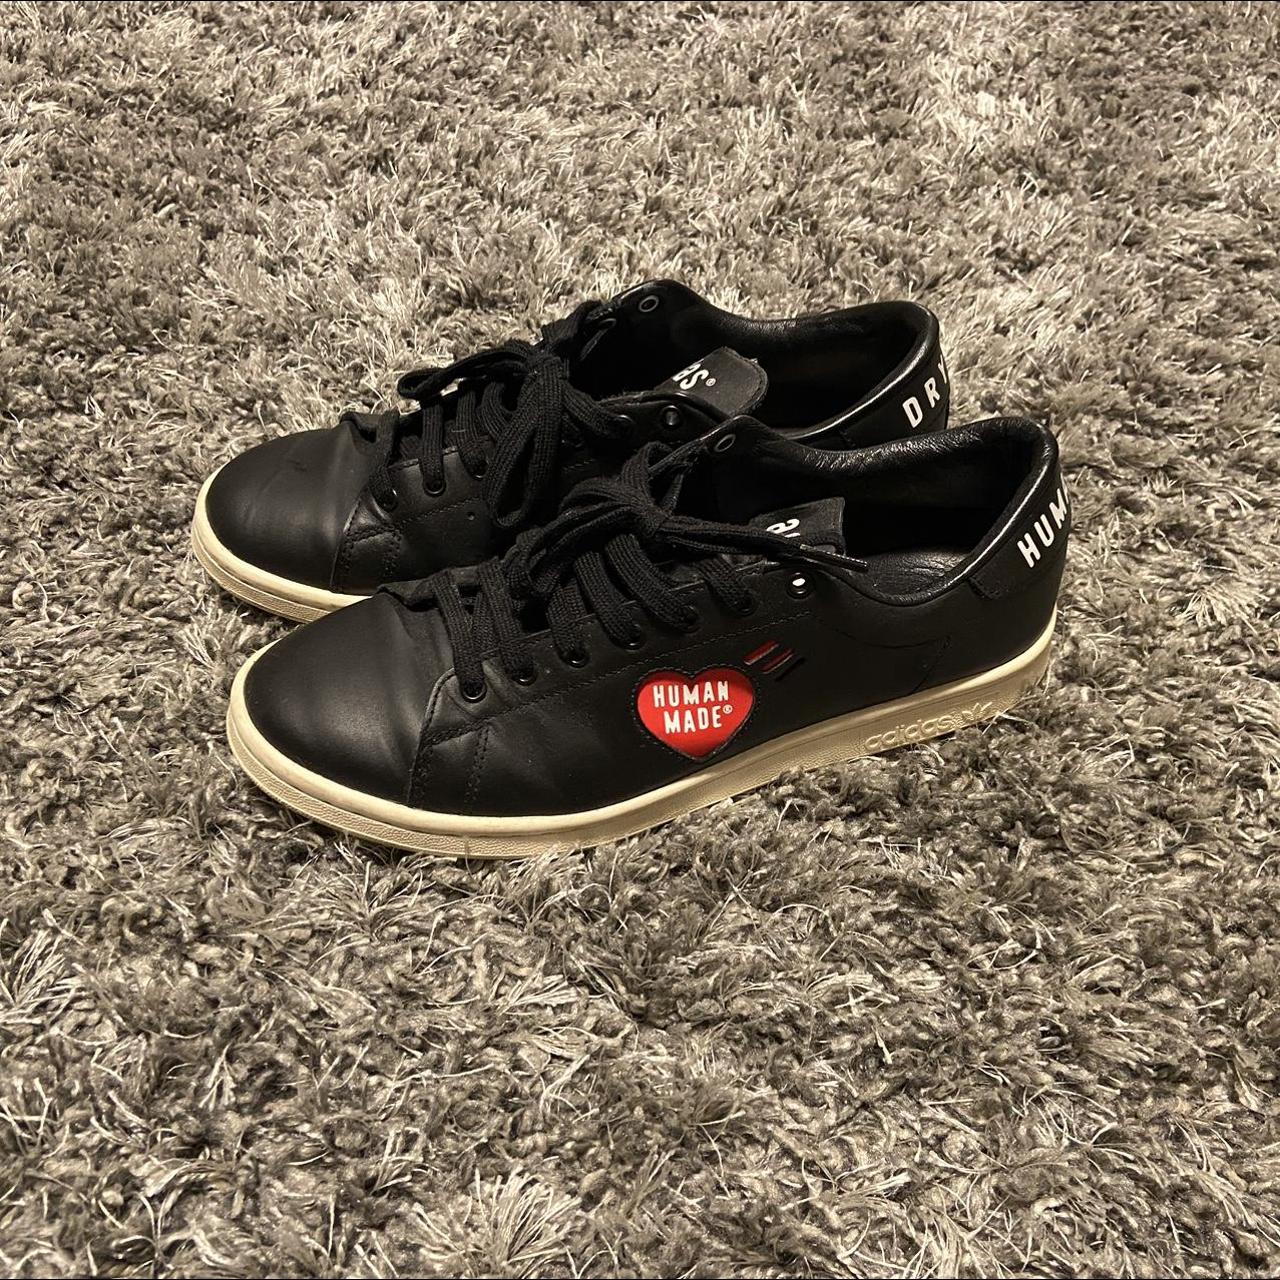 Human Made Men's Black and Red Trainers